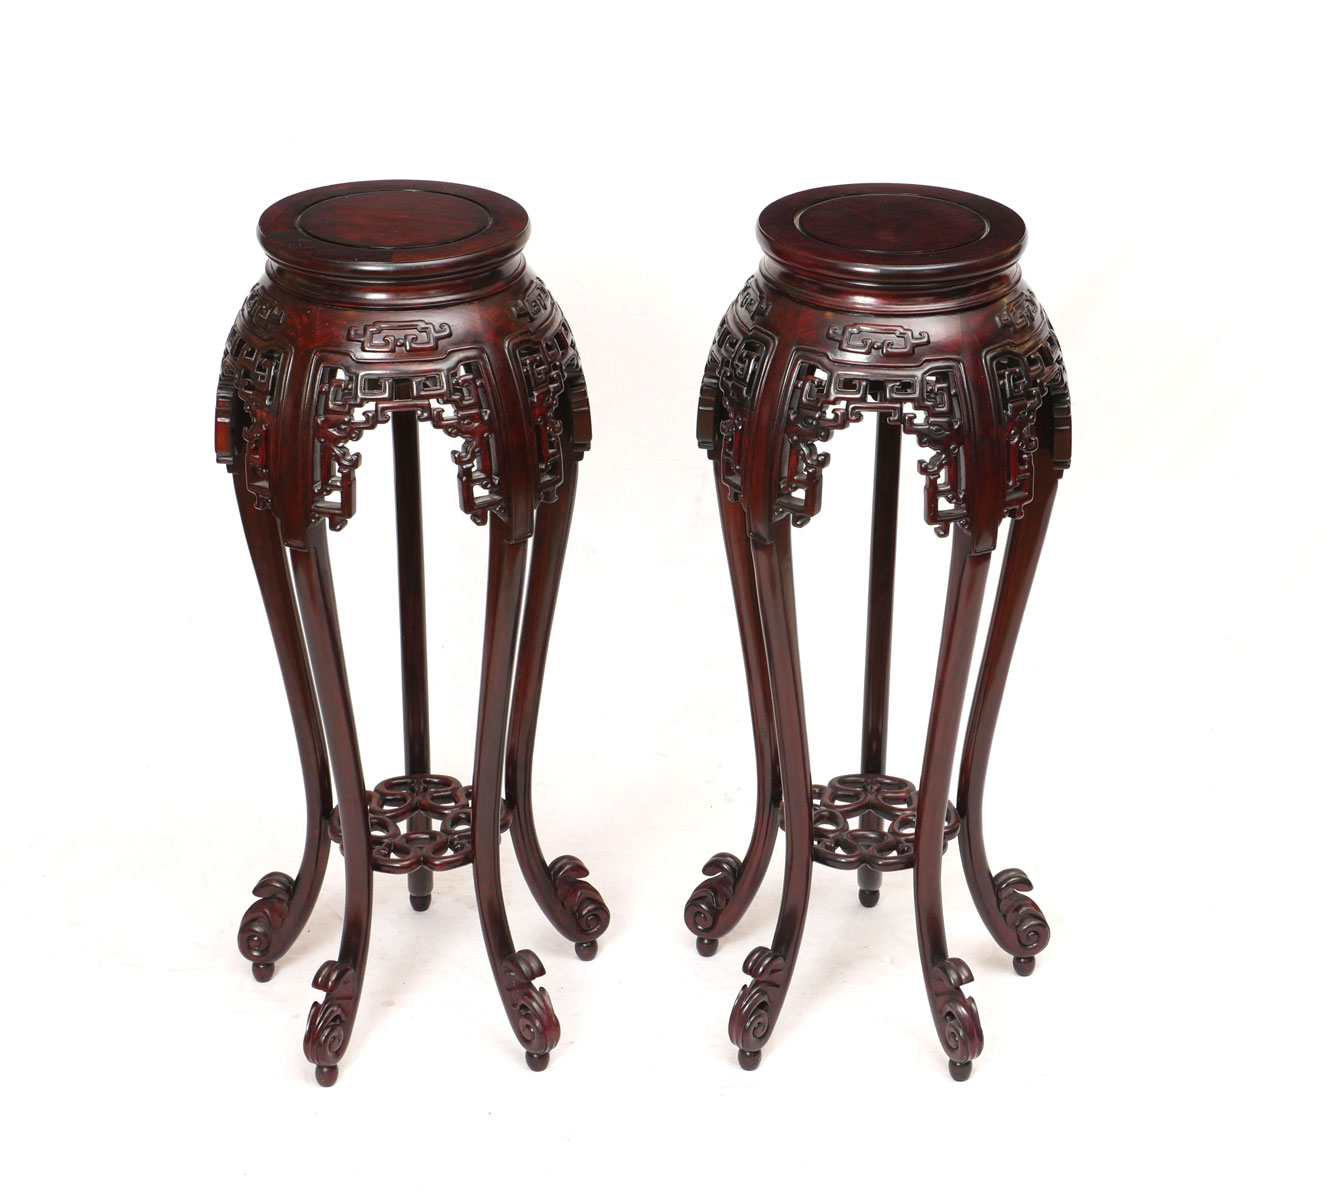 PAIR OF TALL CHINESE ROSEWOOD FERN 36f8f0